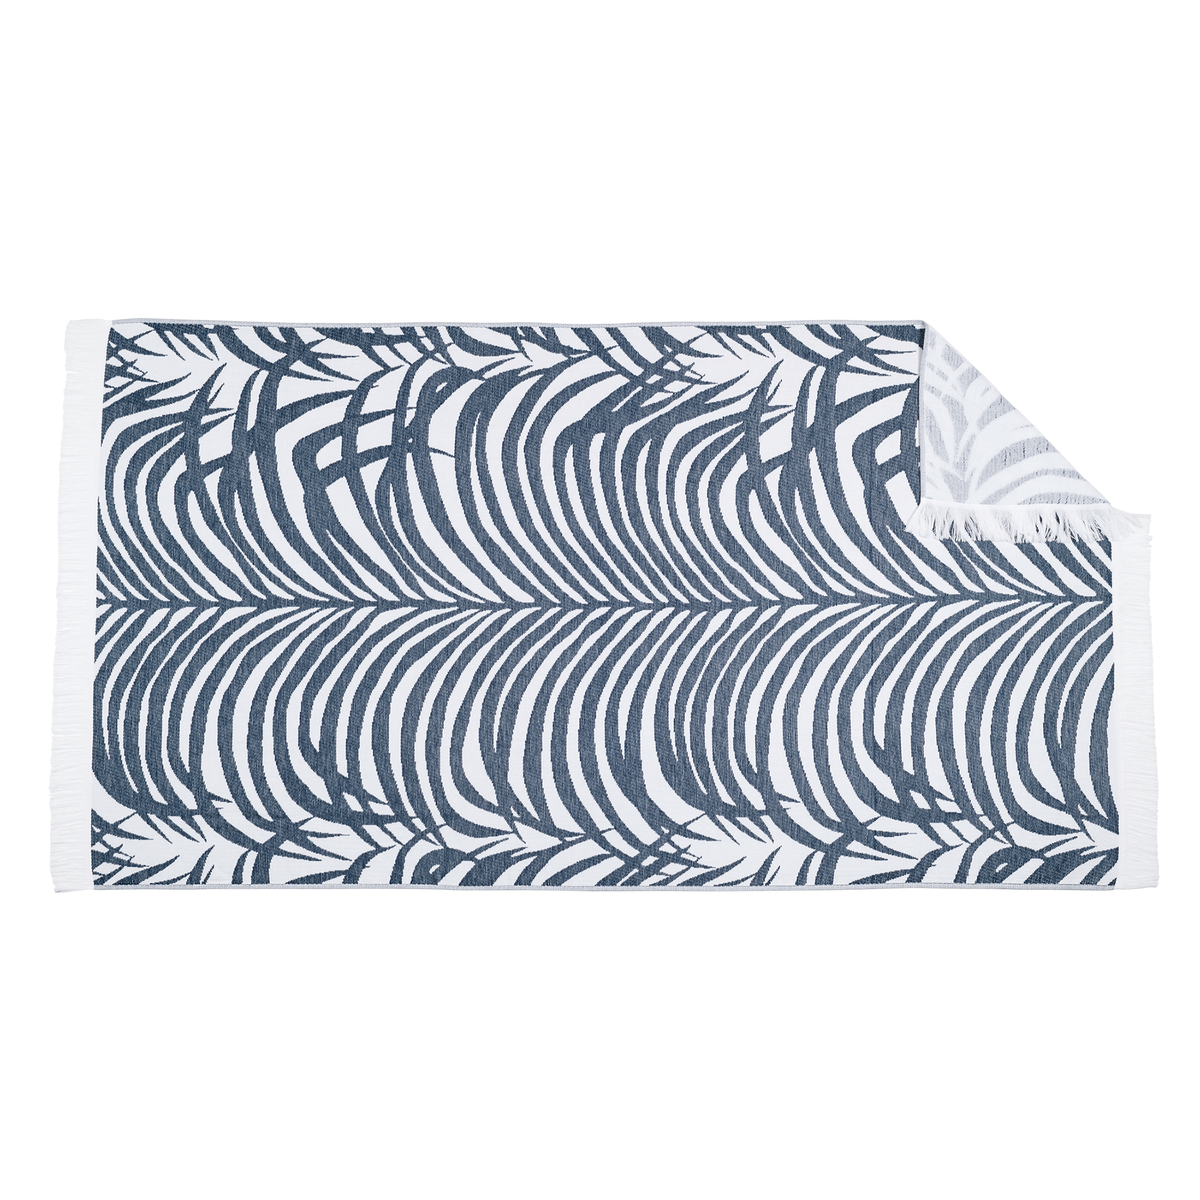 Silo Image of Matouk Zebra Palm Beach Towels in Color Navy